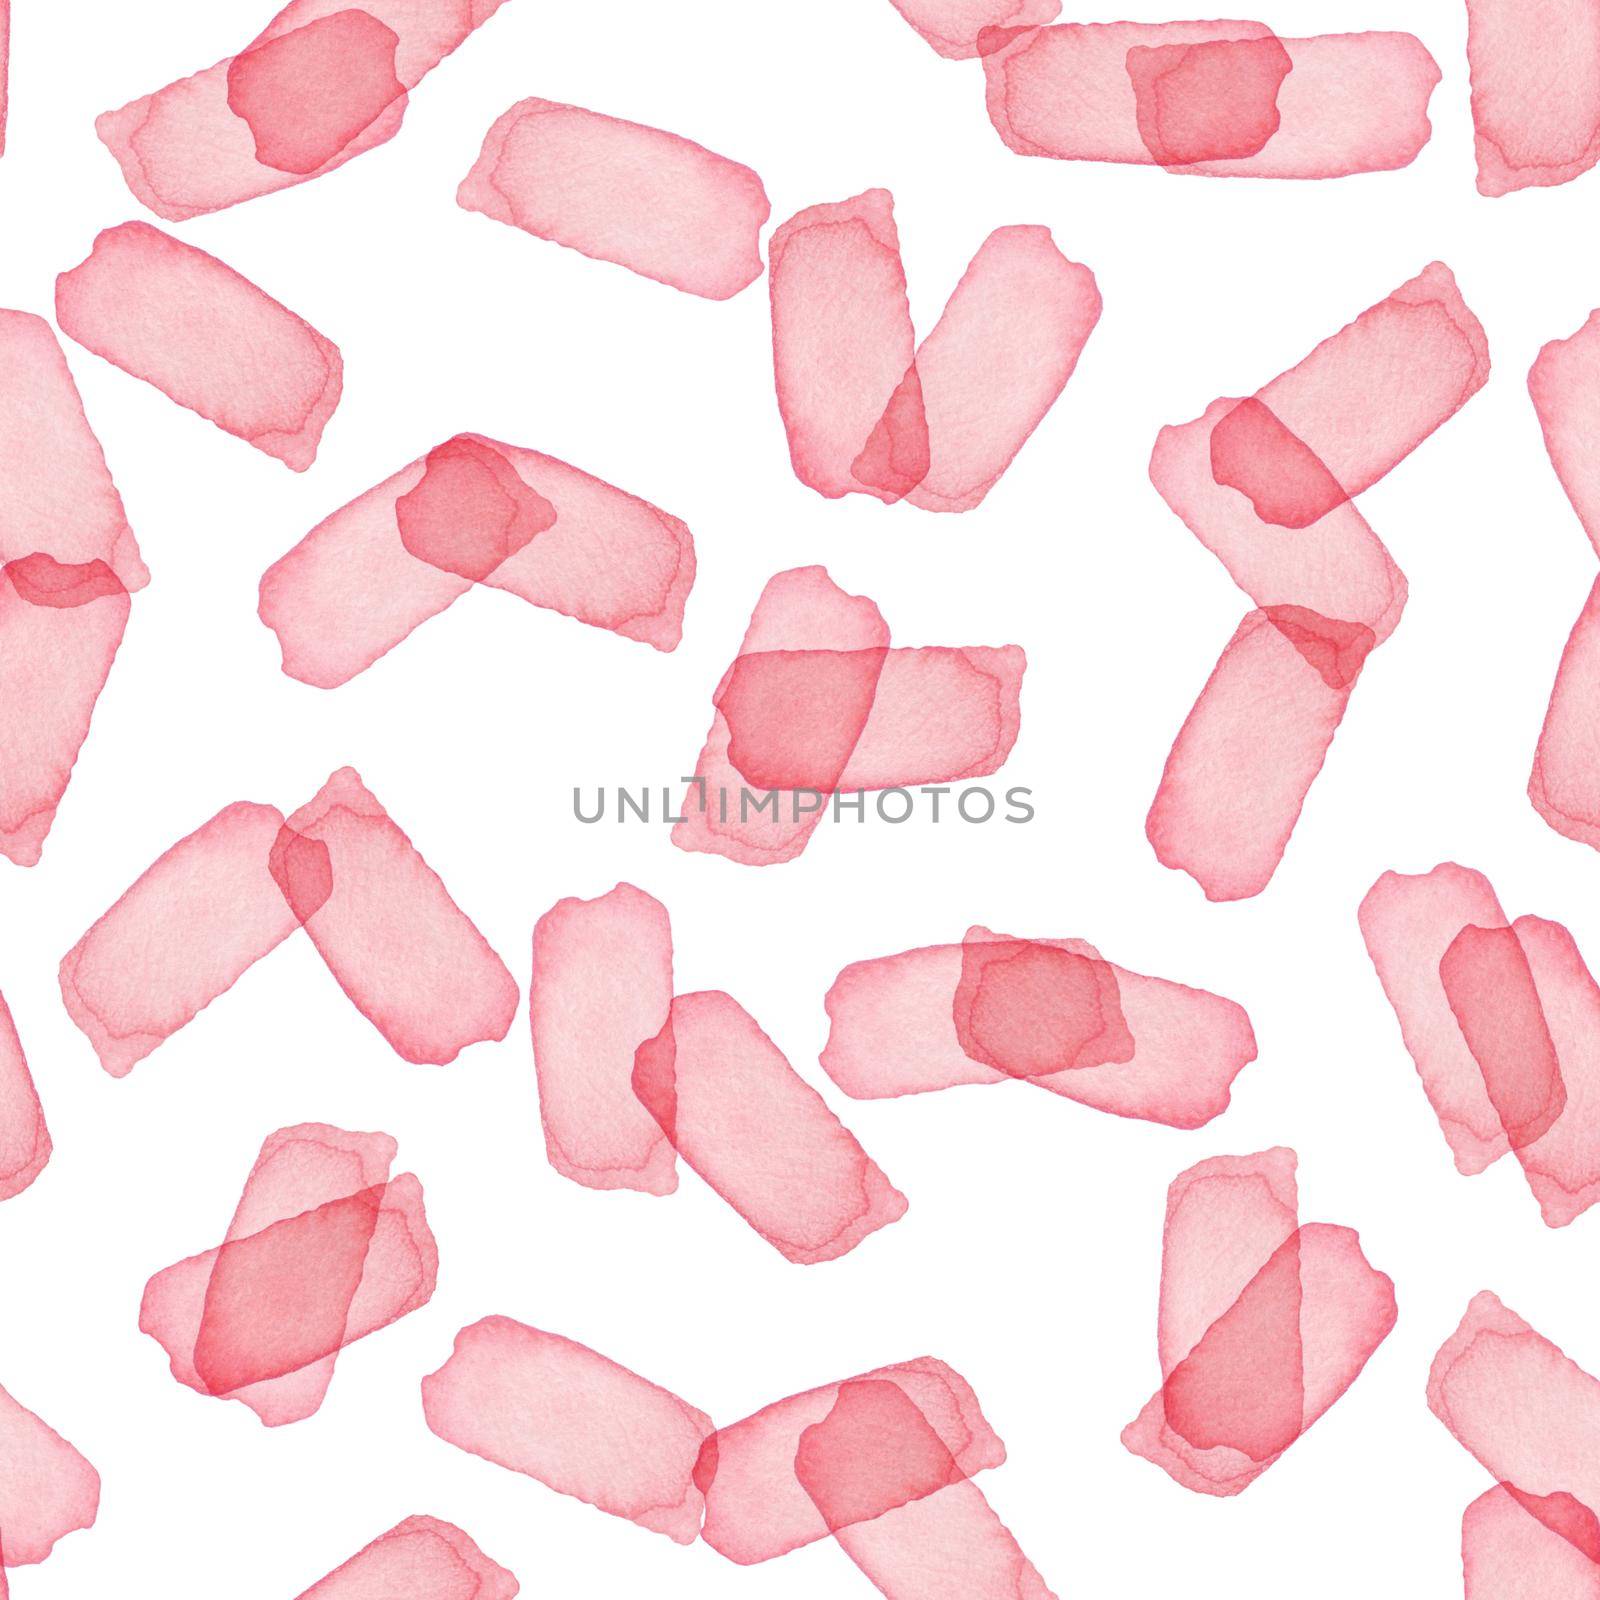 Hand Painted Brush Stroke Seamless Watercolor Pattern. Abstract watercolour shapes in Pink Girly Color. Artistic Design for Fabric and Background.